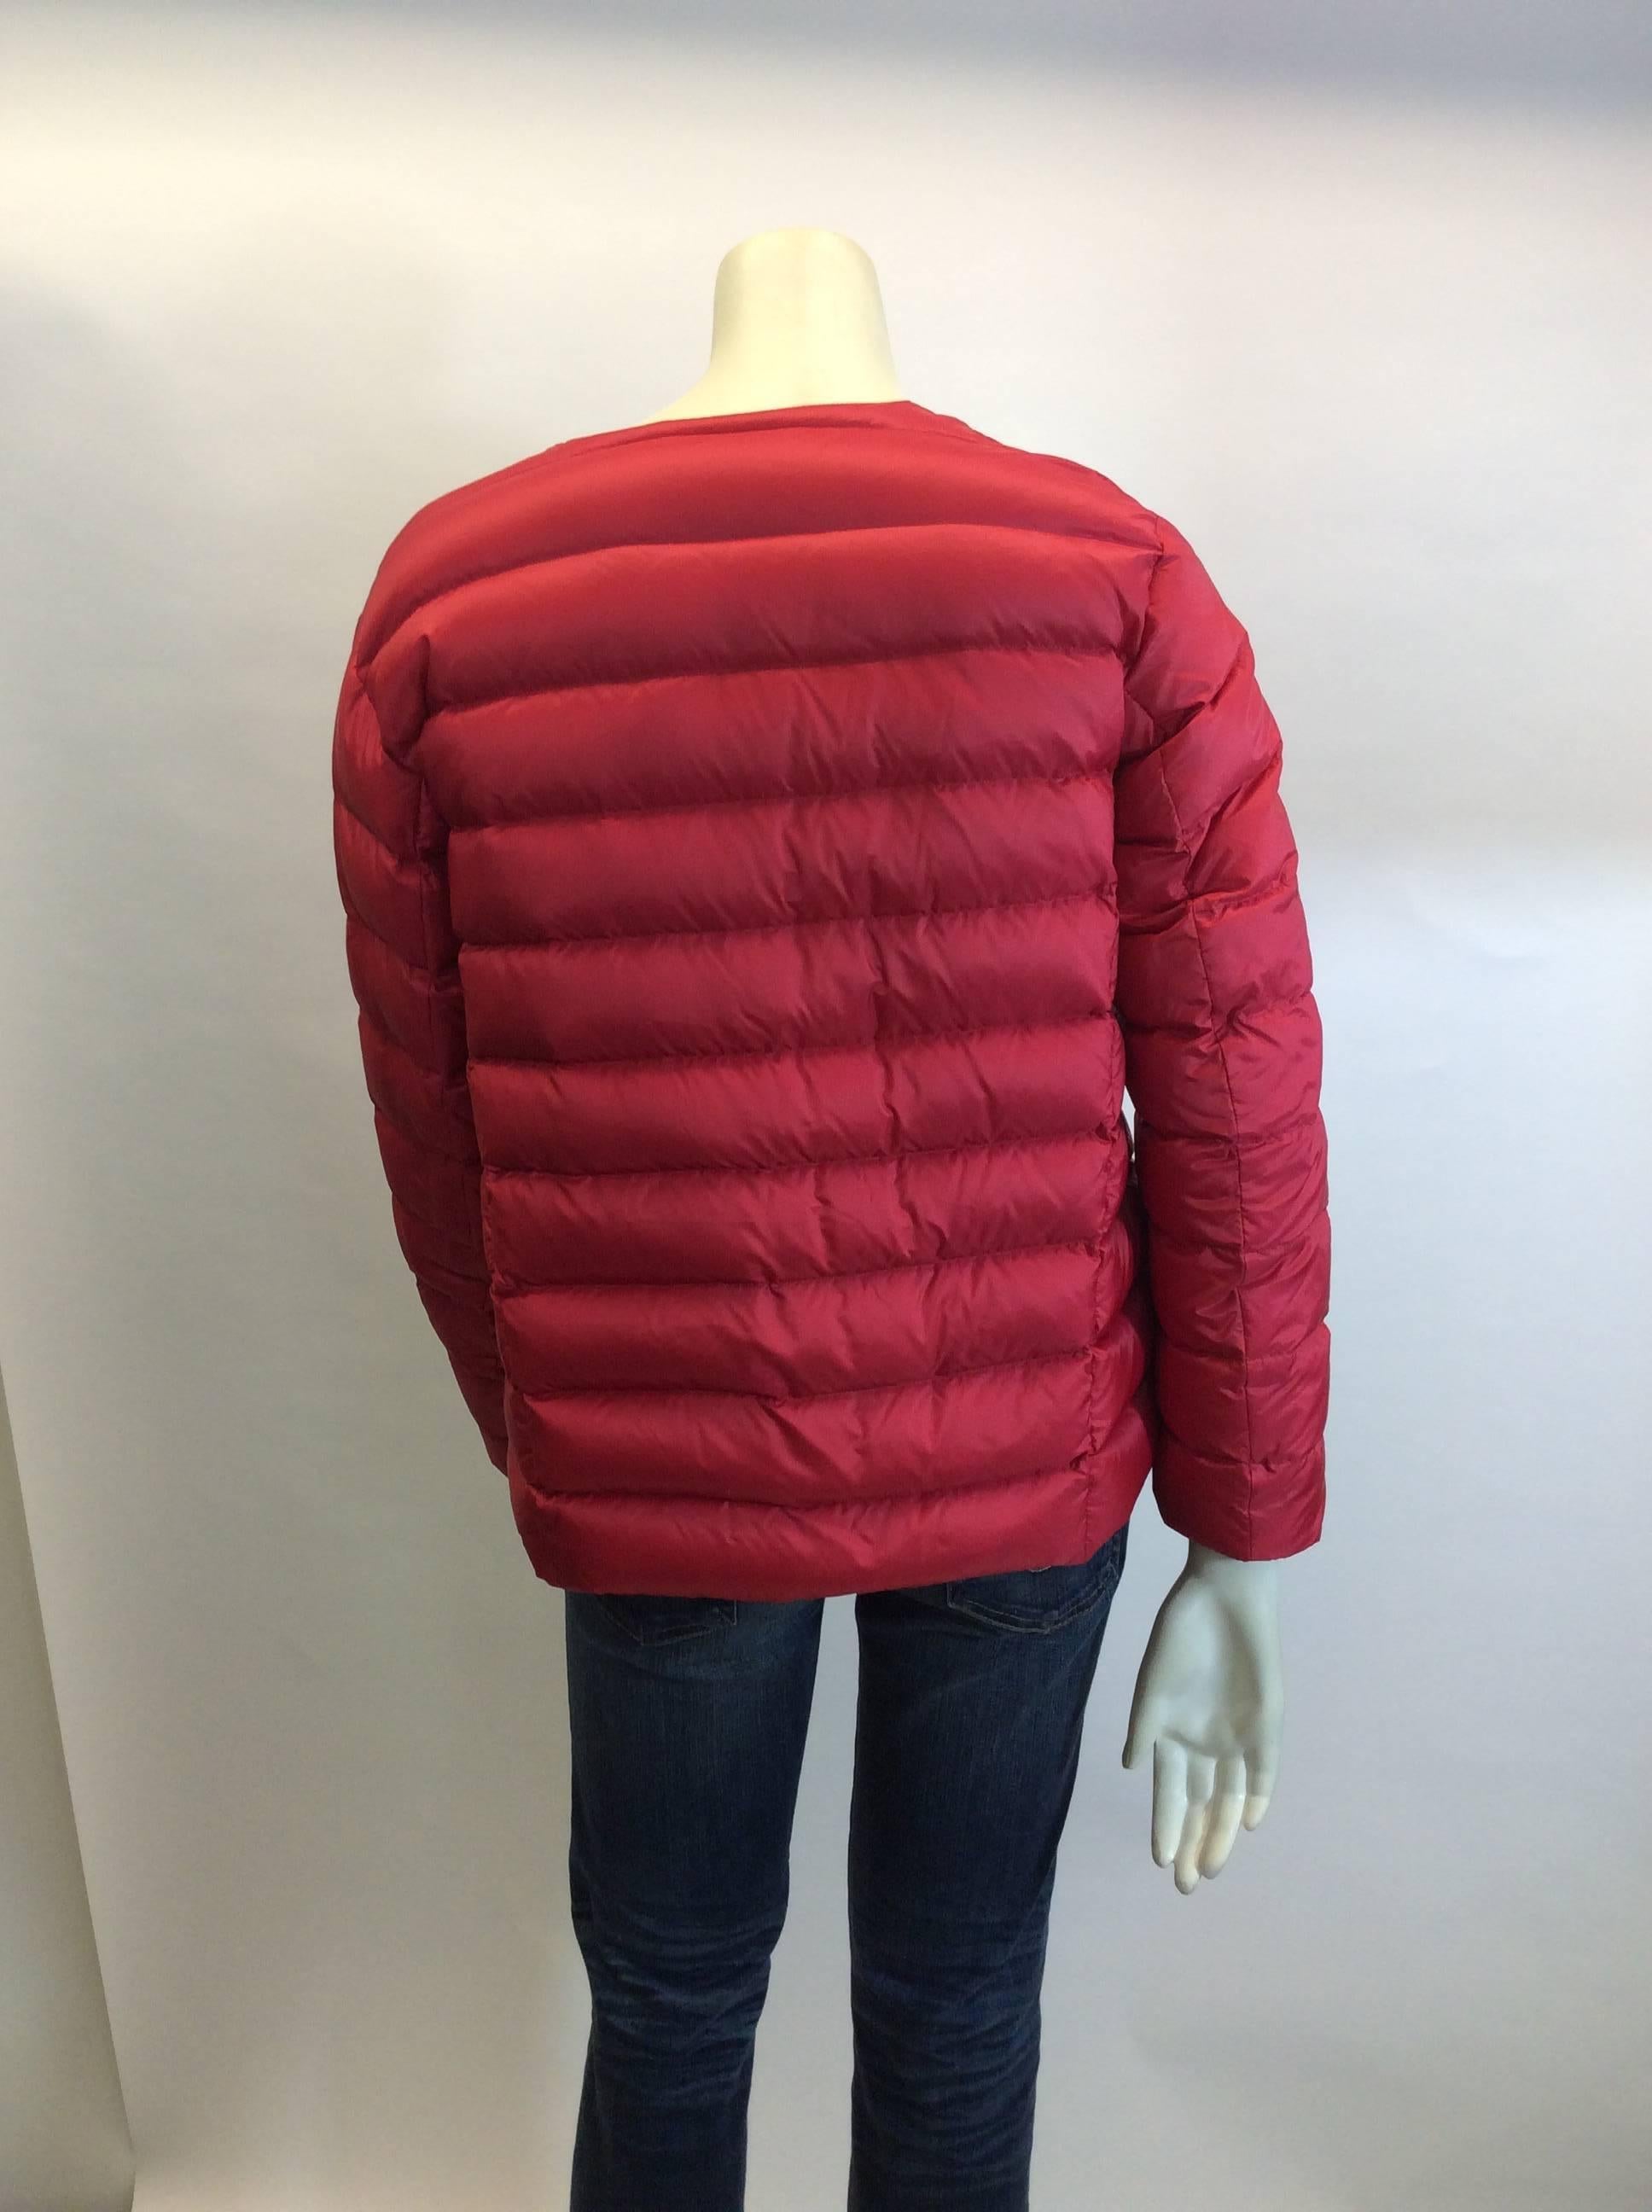 Jil Sander Red Down Jacket In Excellent Condition For Sale In Narberth, PA